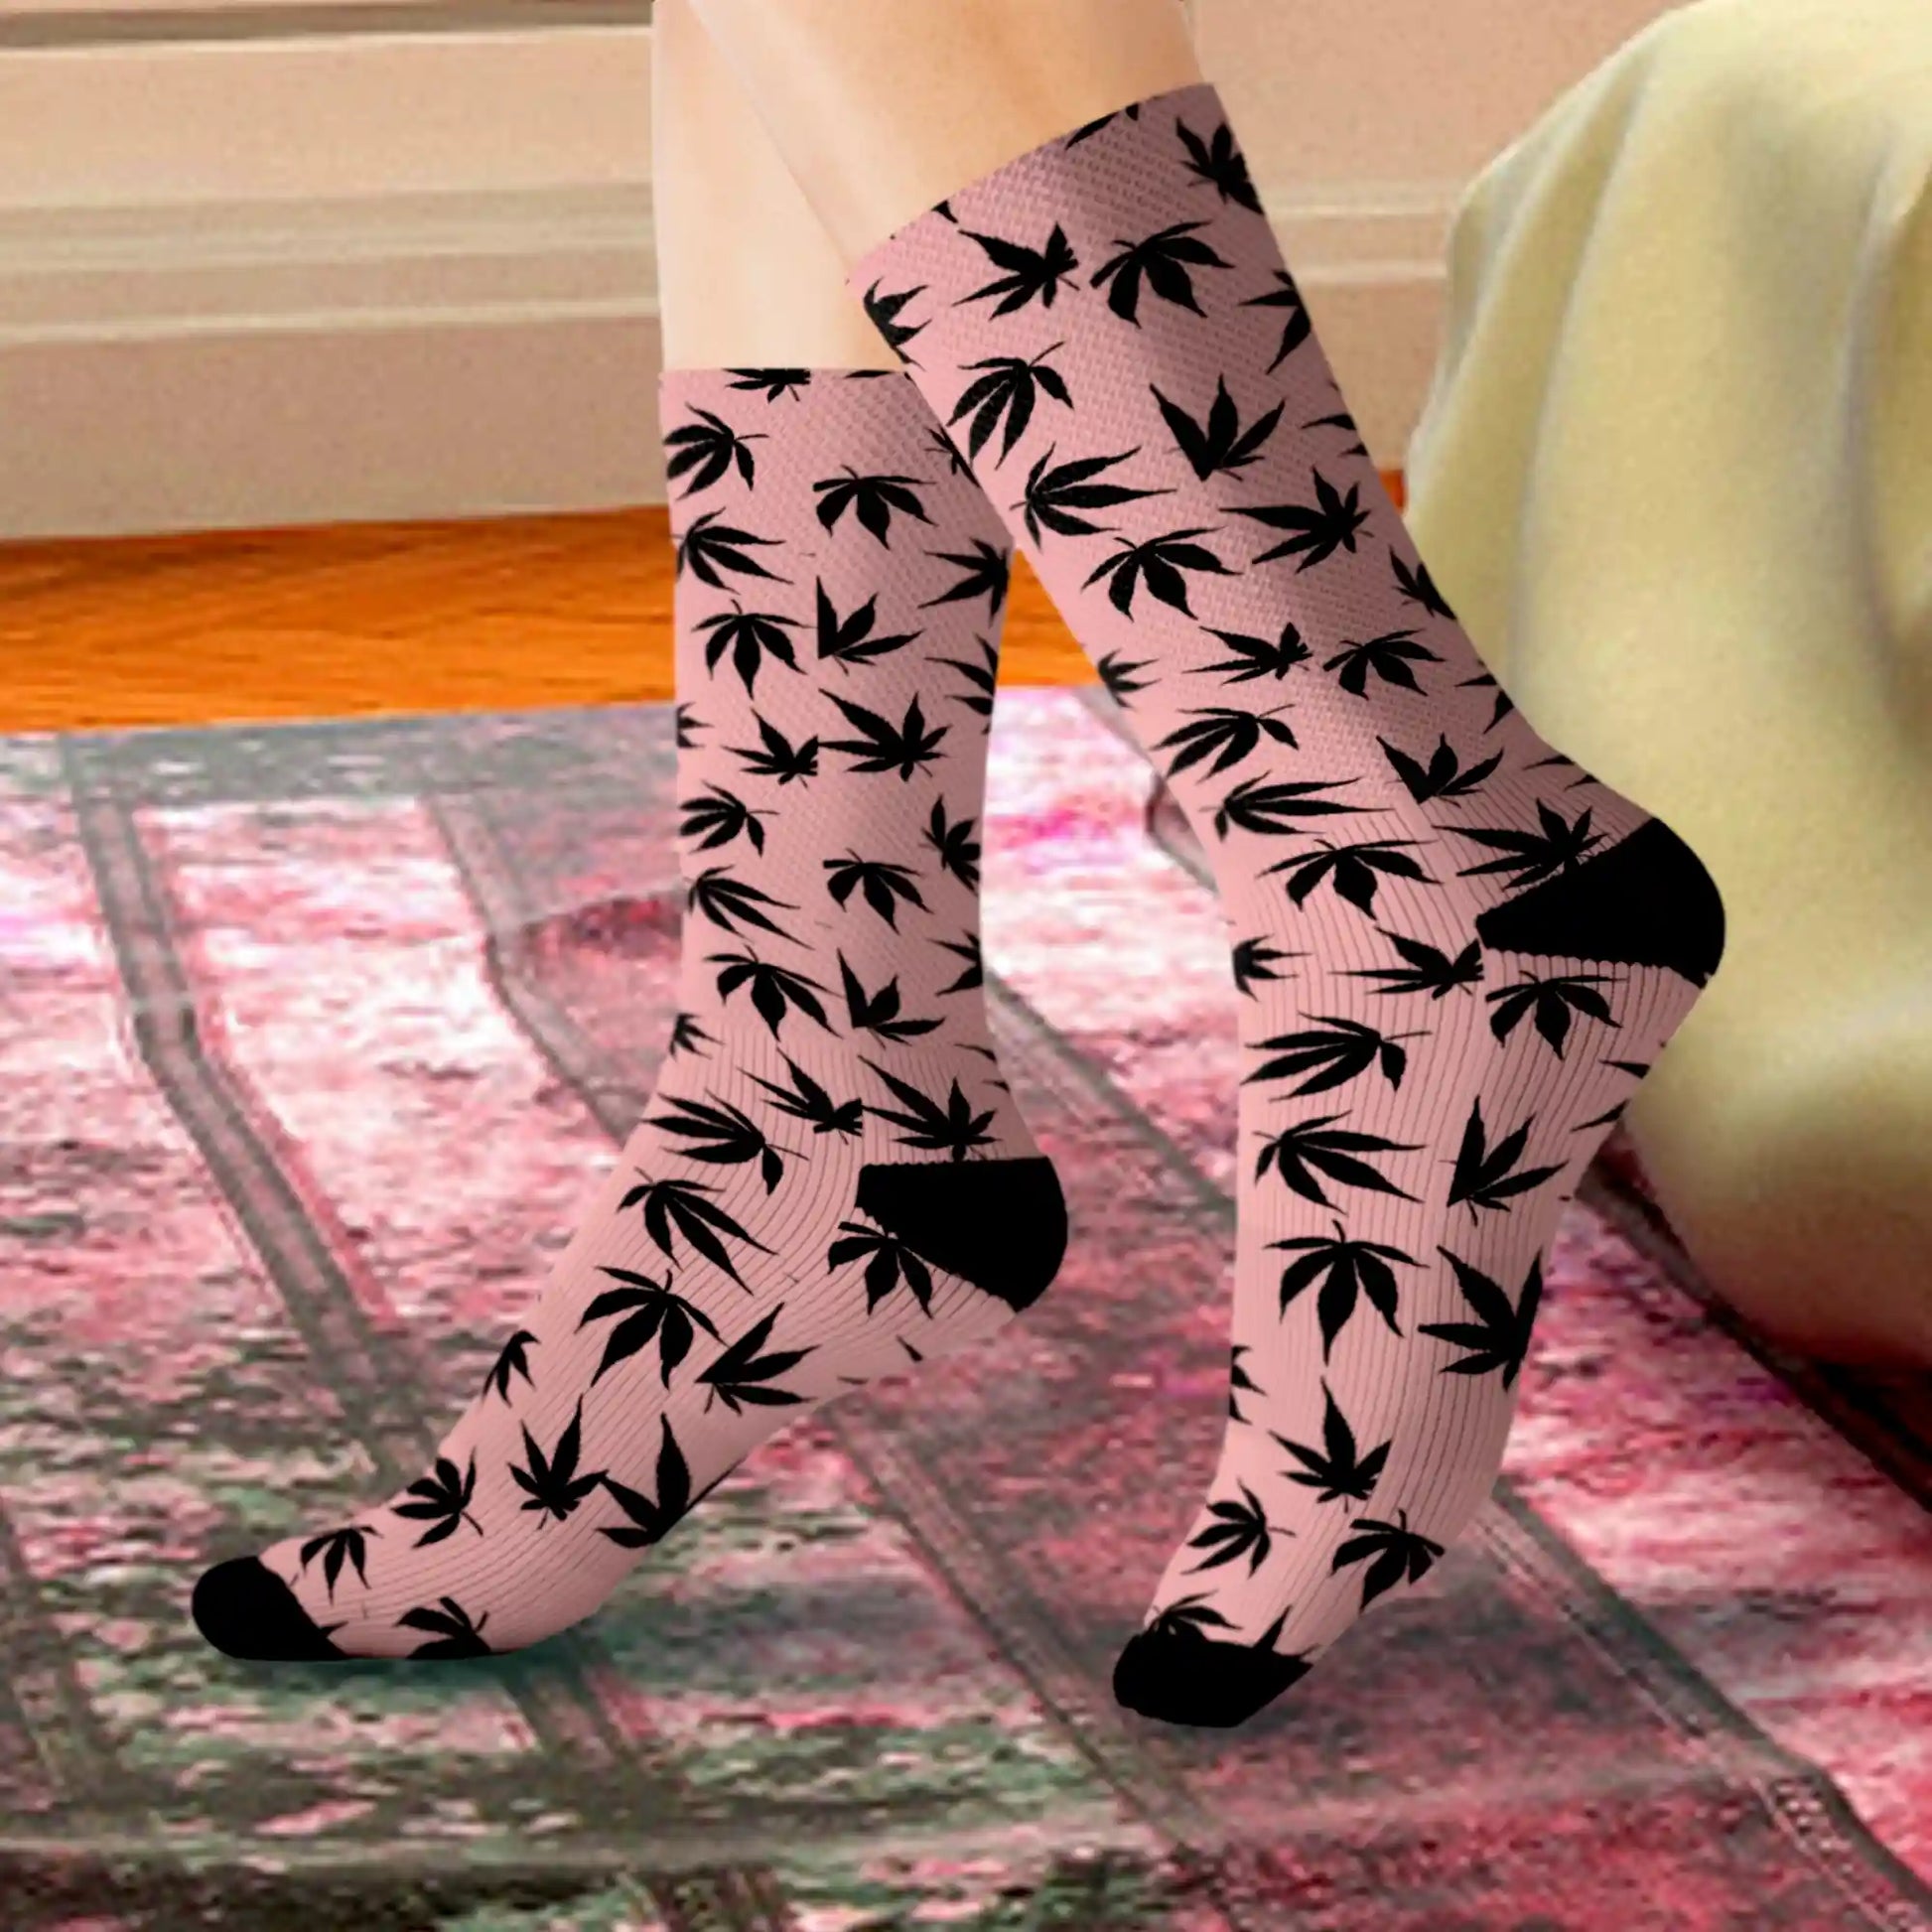 a close up of a stylish pair of pink and black marijuana socks with black cannabis leaves all over in a bedroom setting